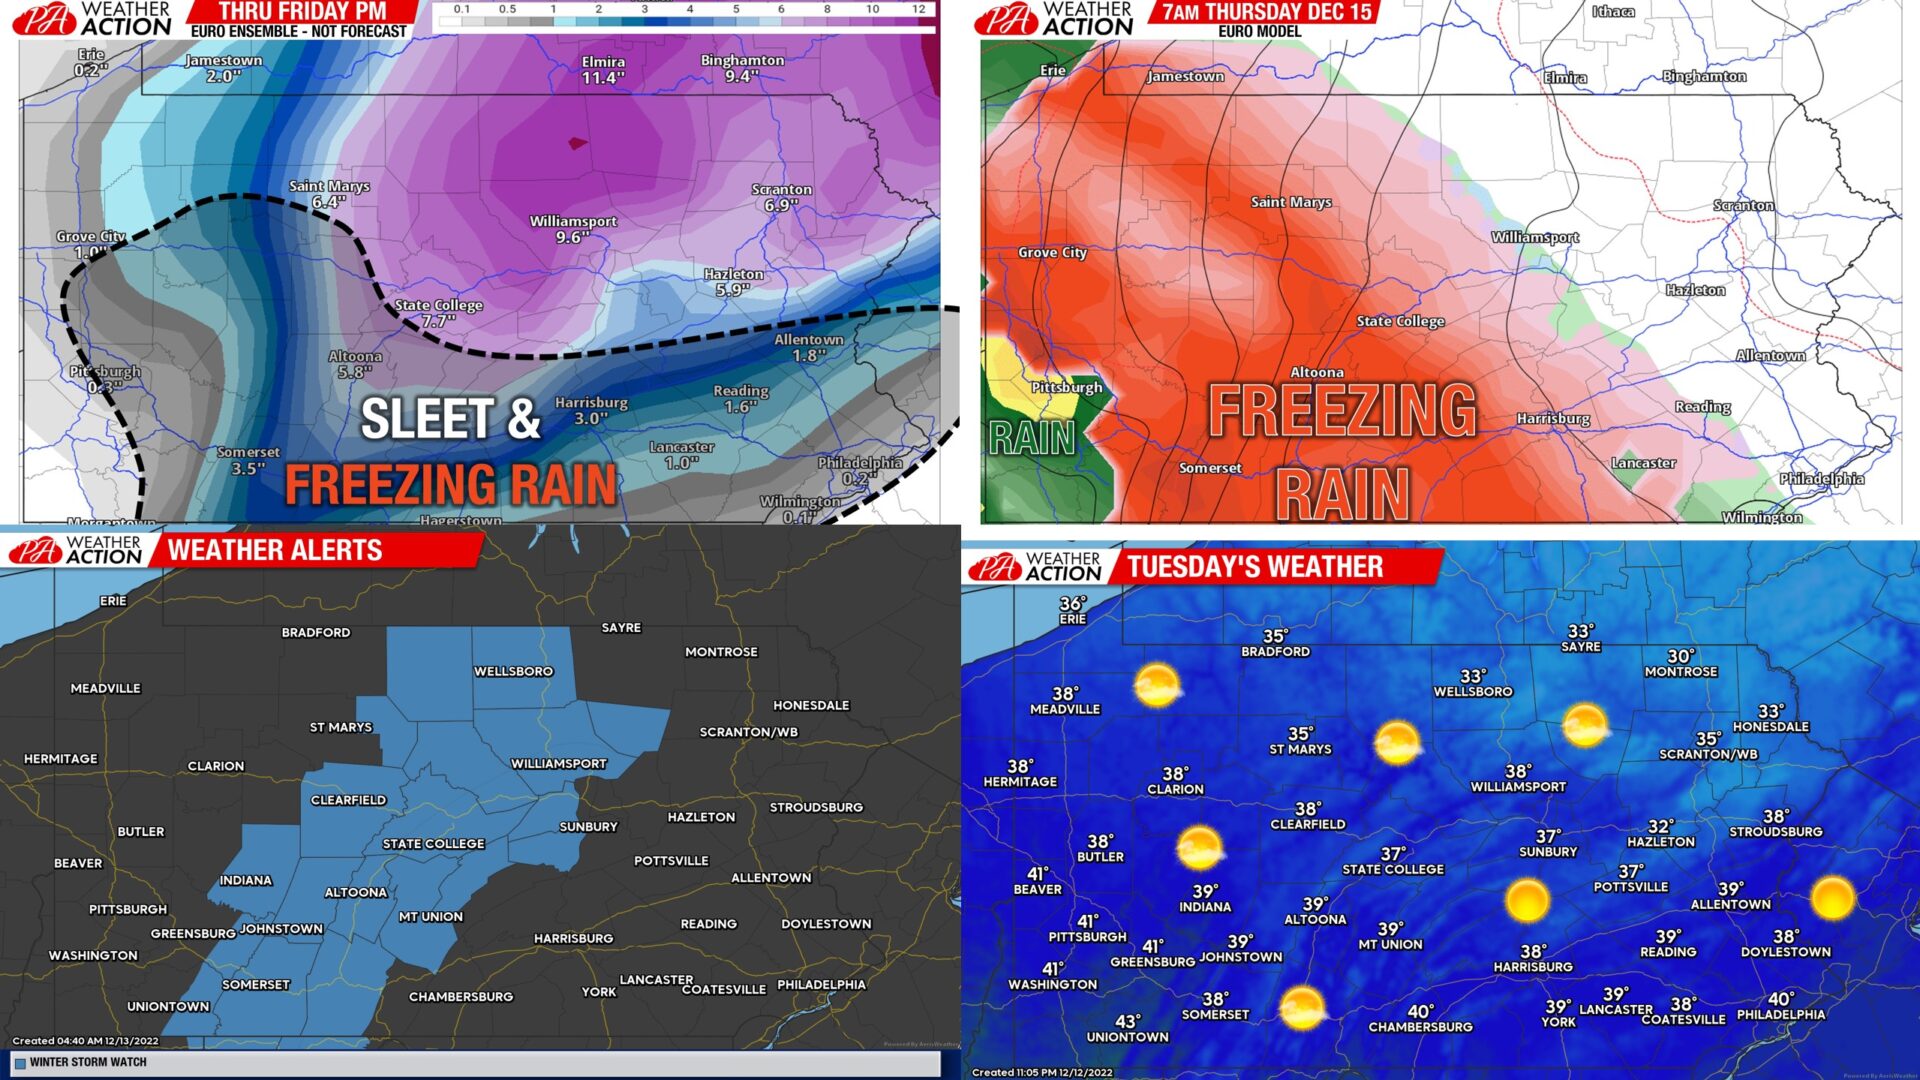 Tuesday December 13 Report: Threat of Ice Storm Rising for Thursday In Many Areas; Winter Storm Watches Issued